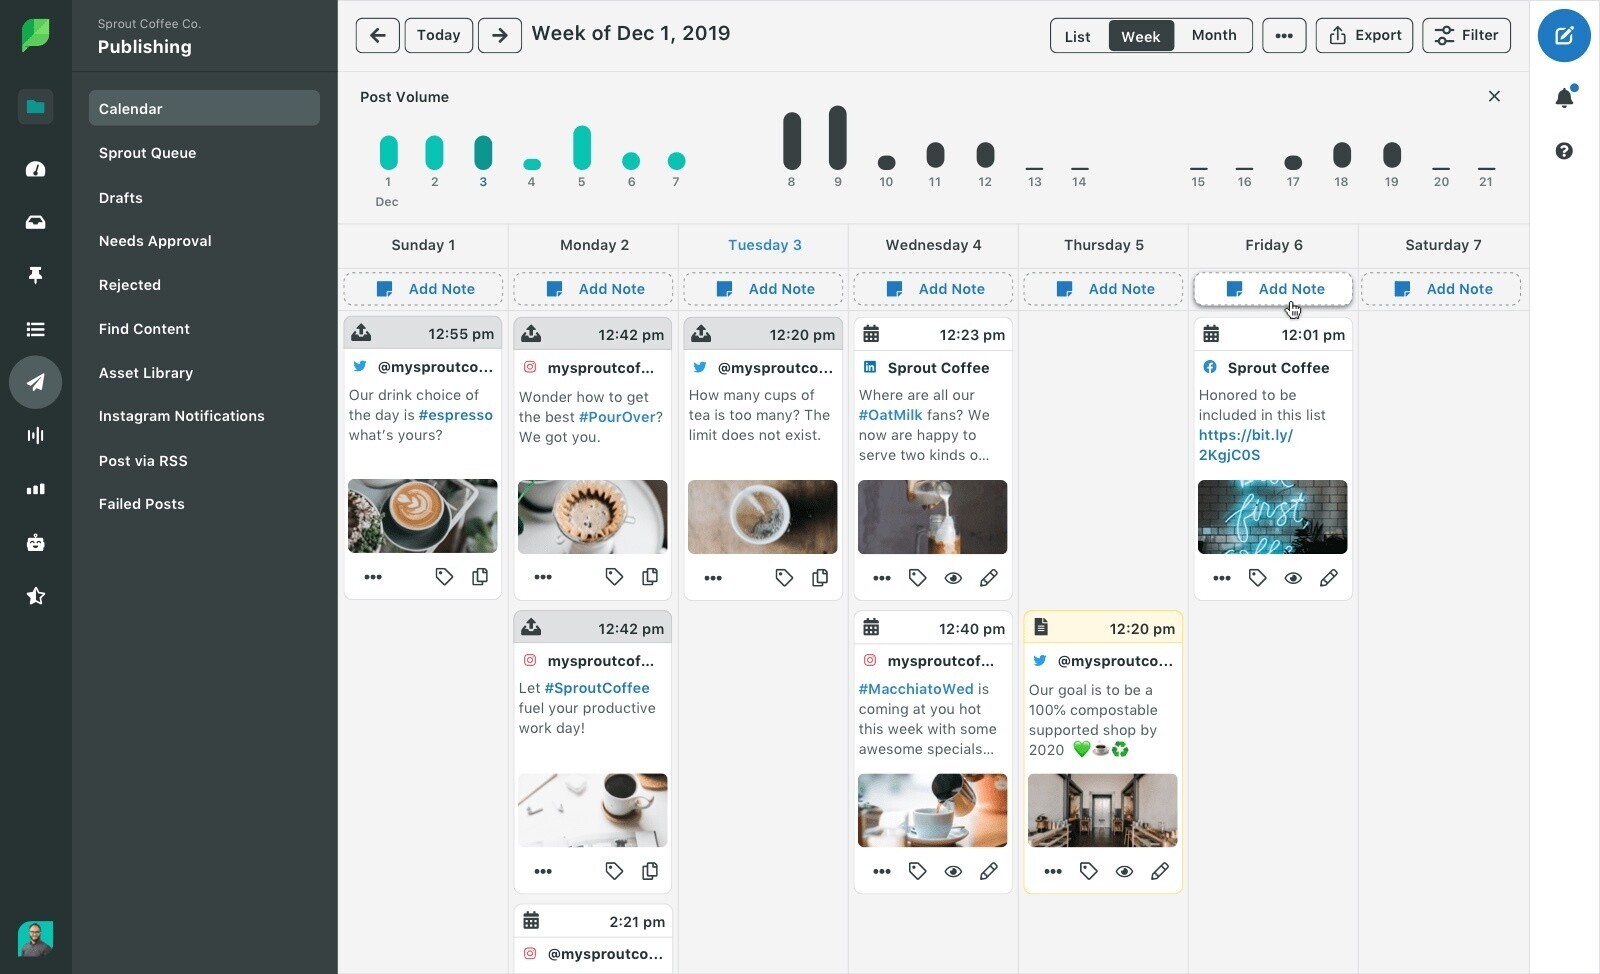 Sprout Social displays all the content scheduled across different social channels over the coming weeks and month